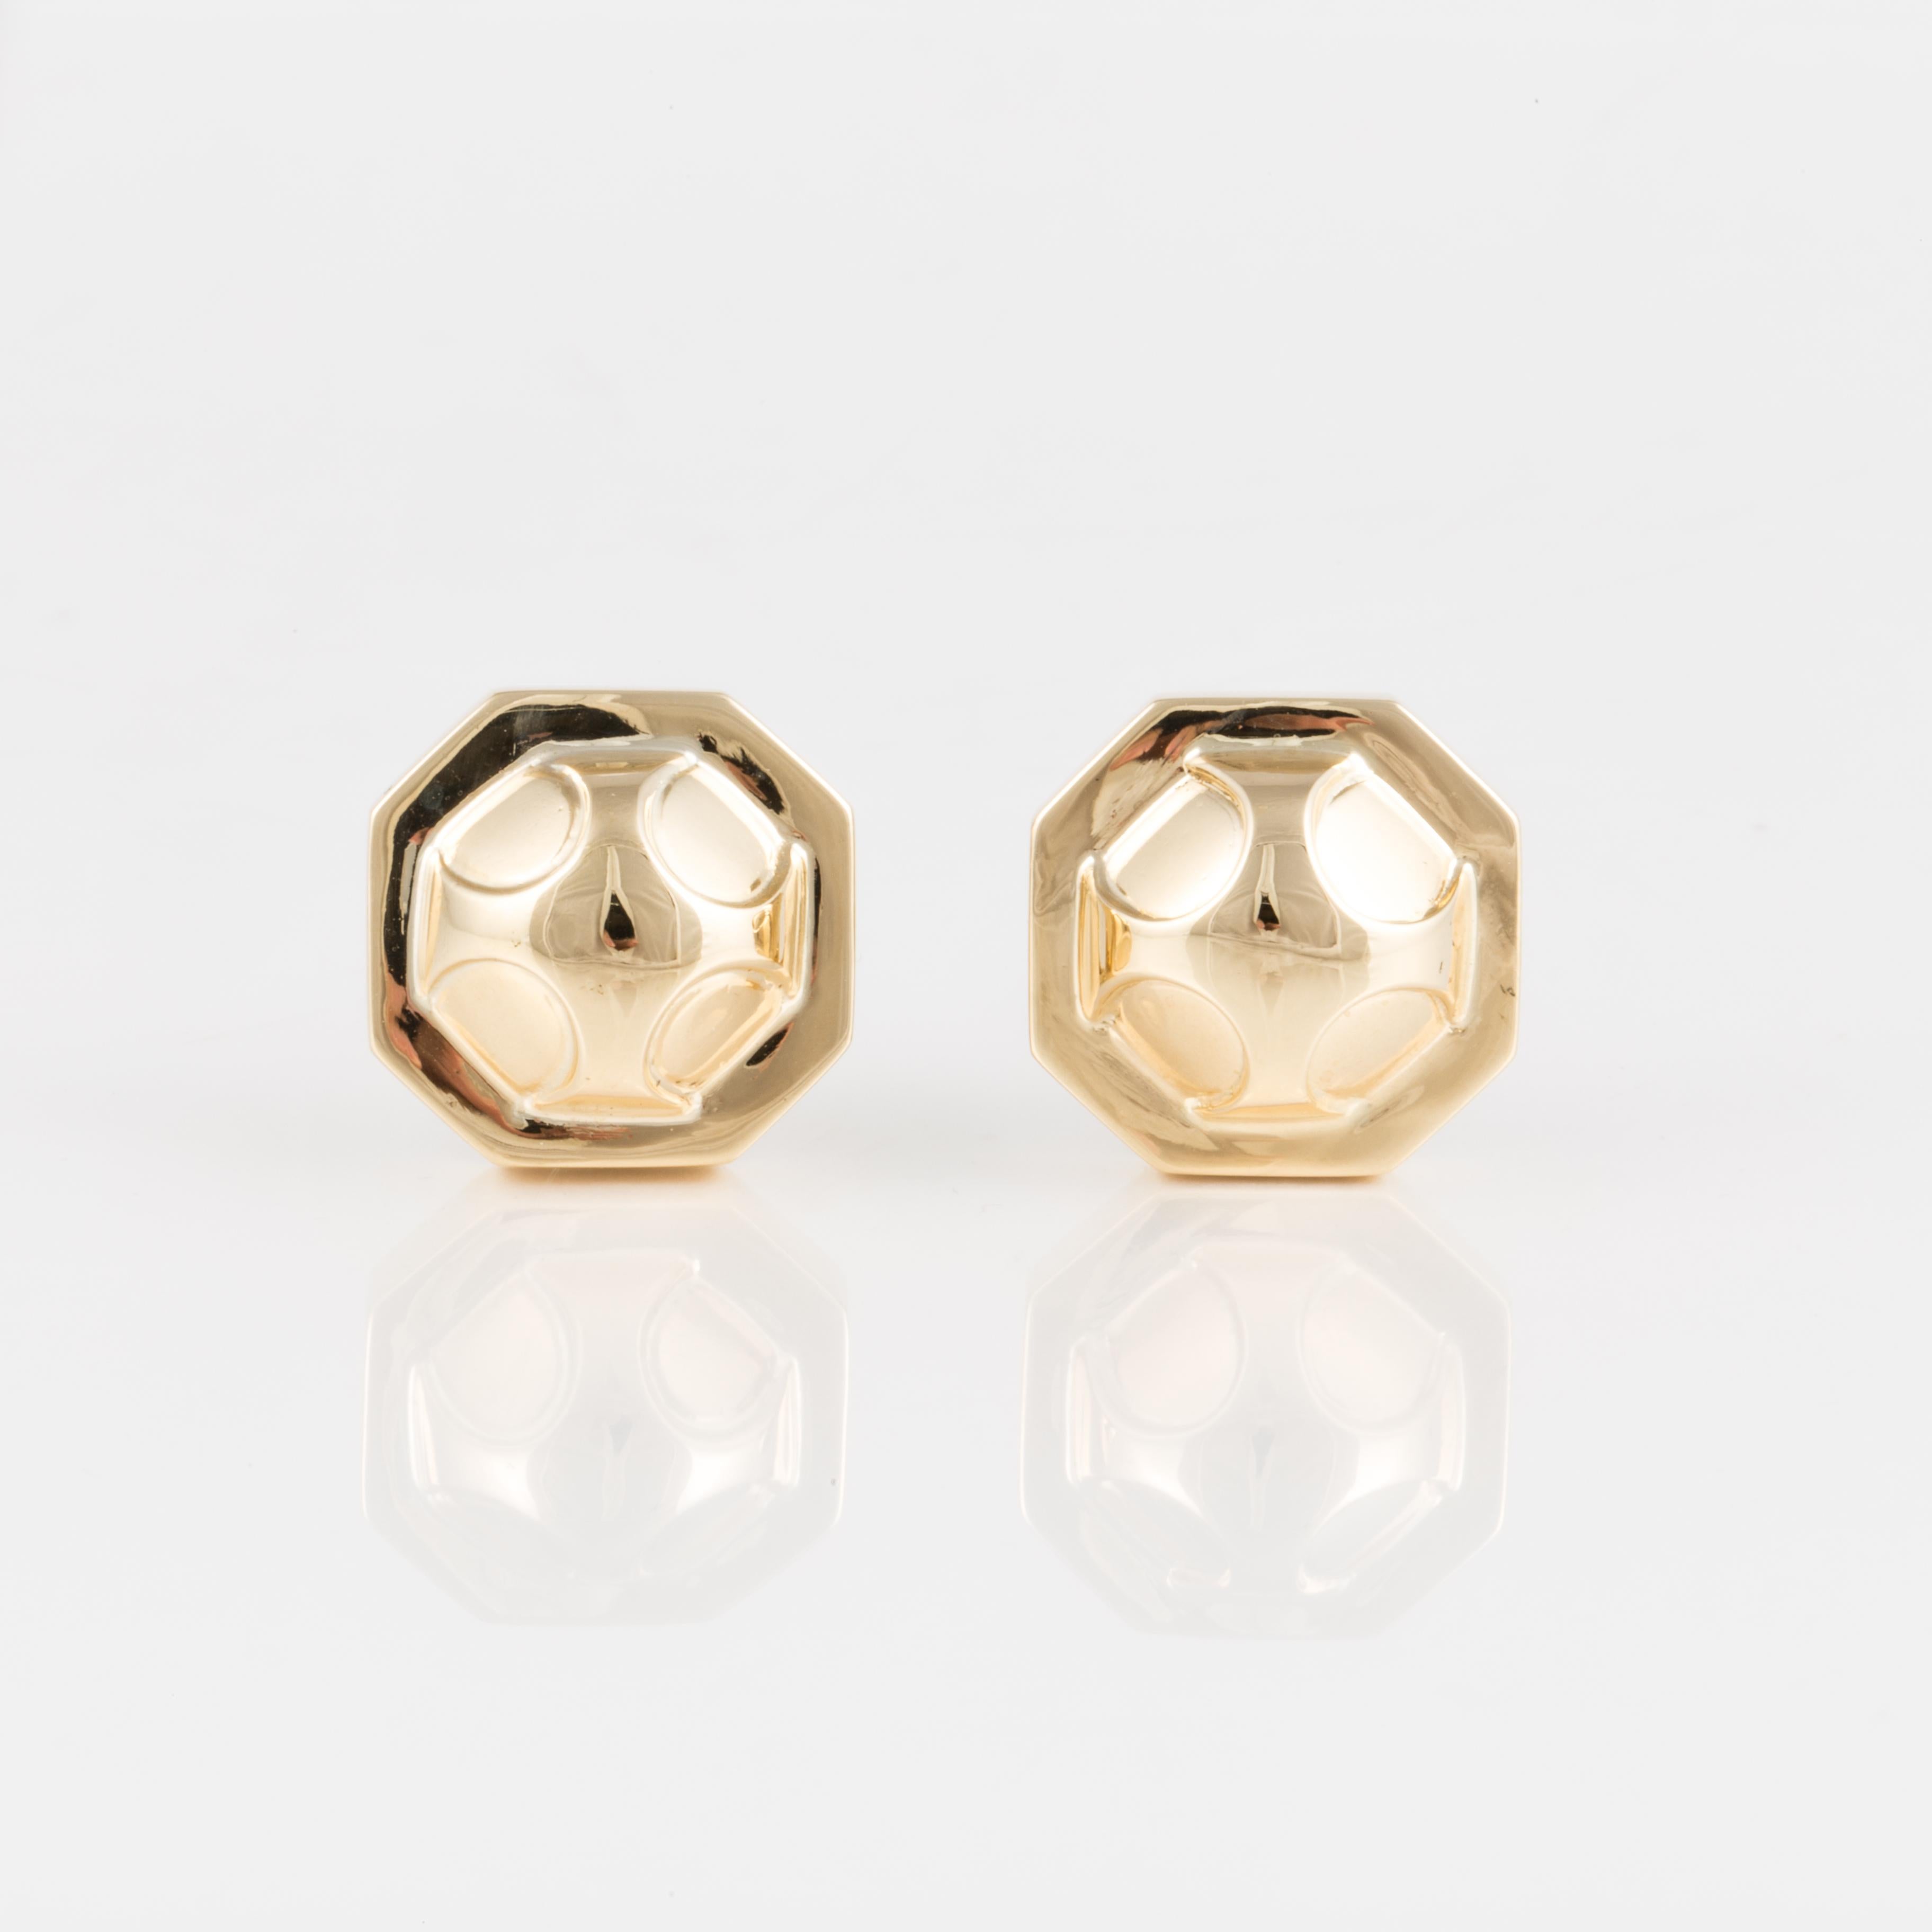 Estate David Webb earrings in 18K yellow gold button ear clips in an octagonal shape with an engraved dome in the center.  Measuring 3/4 inches across and stand 3/8 inches off the ear.  Clip-on style.